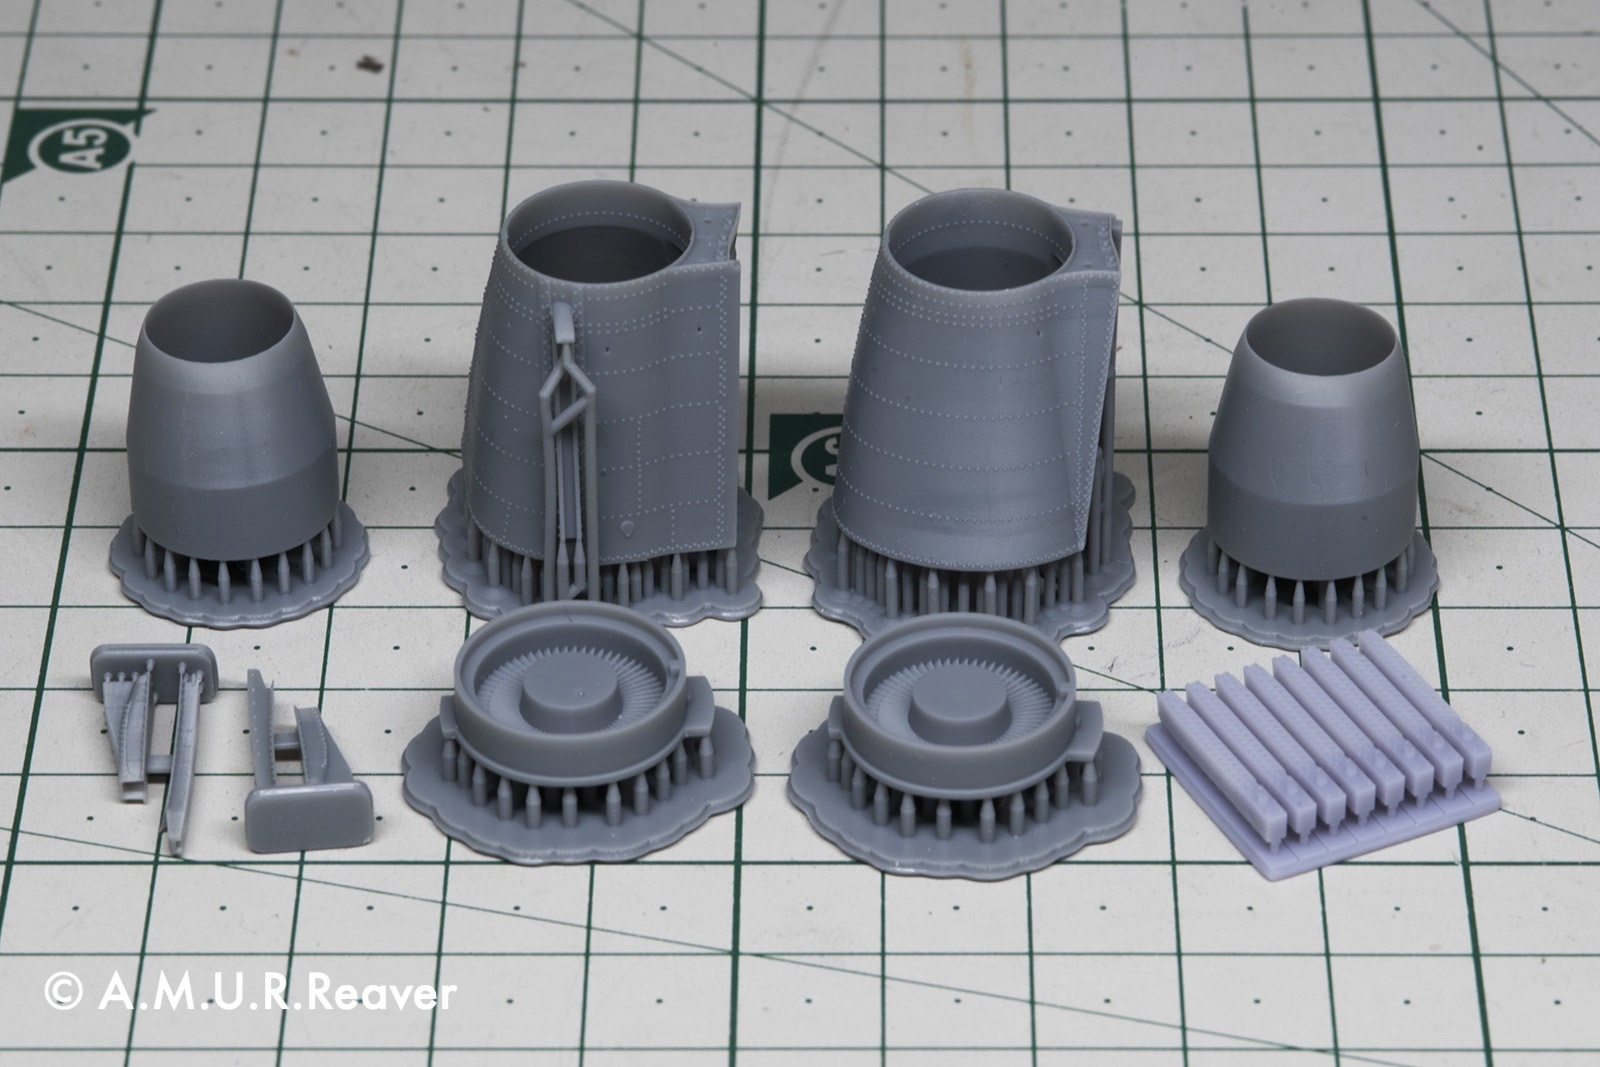 Su-25 engine nozzles and cocoons with ASO blocks for Zvezda (for pre-order with PRE-QNT4001 only)